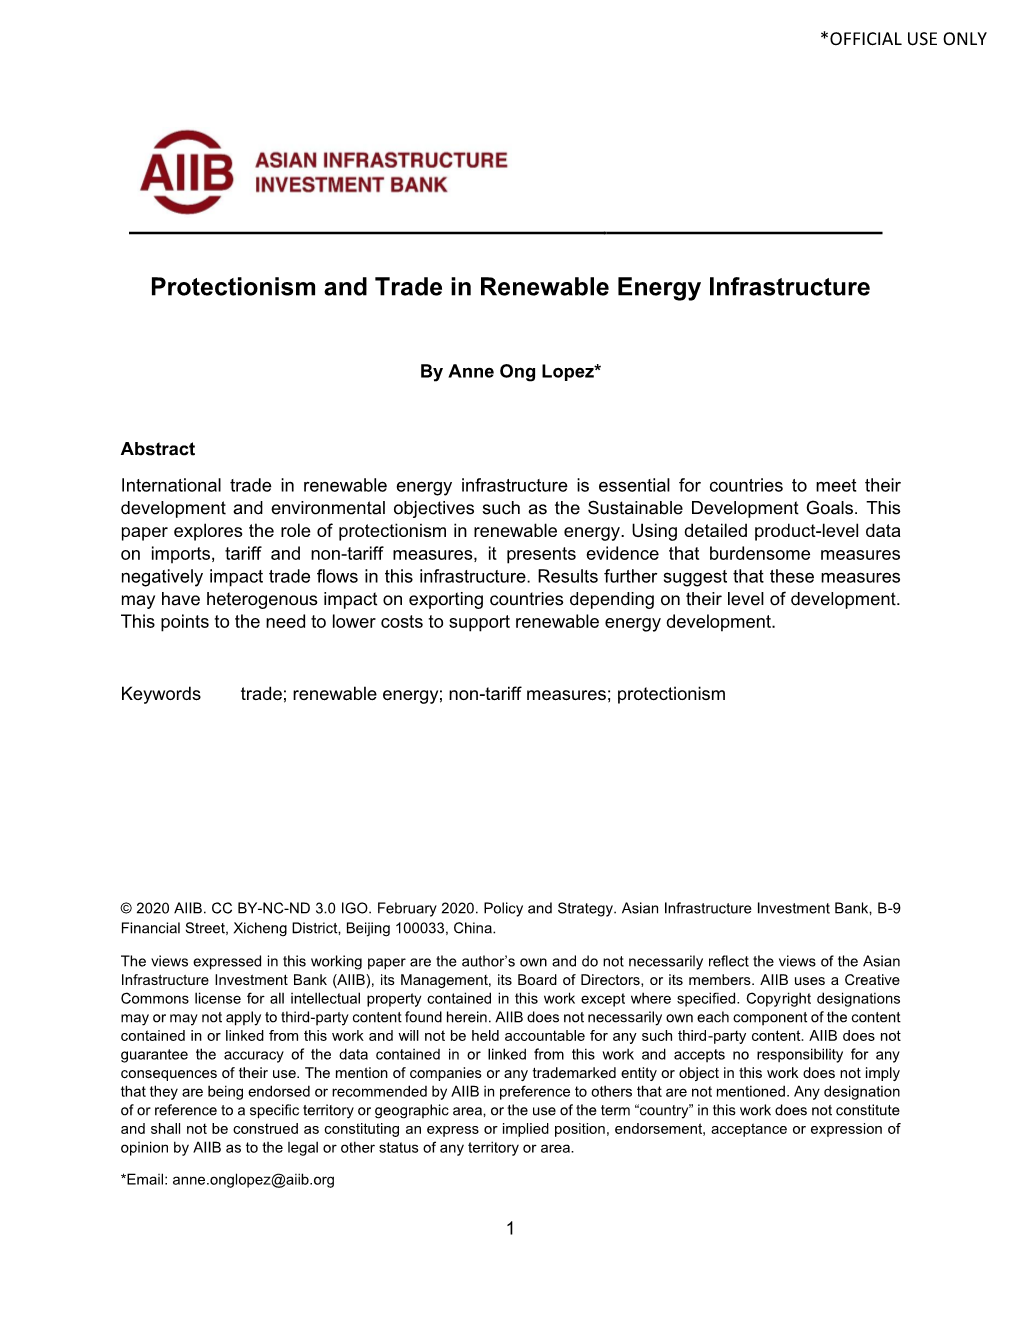 Protectionism and Trade in Renewable Energy Infrastructure